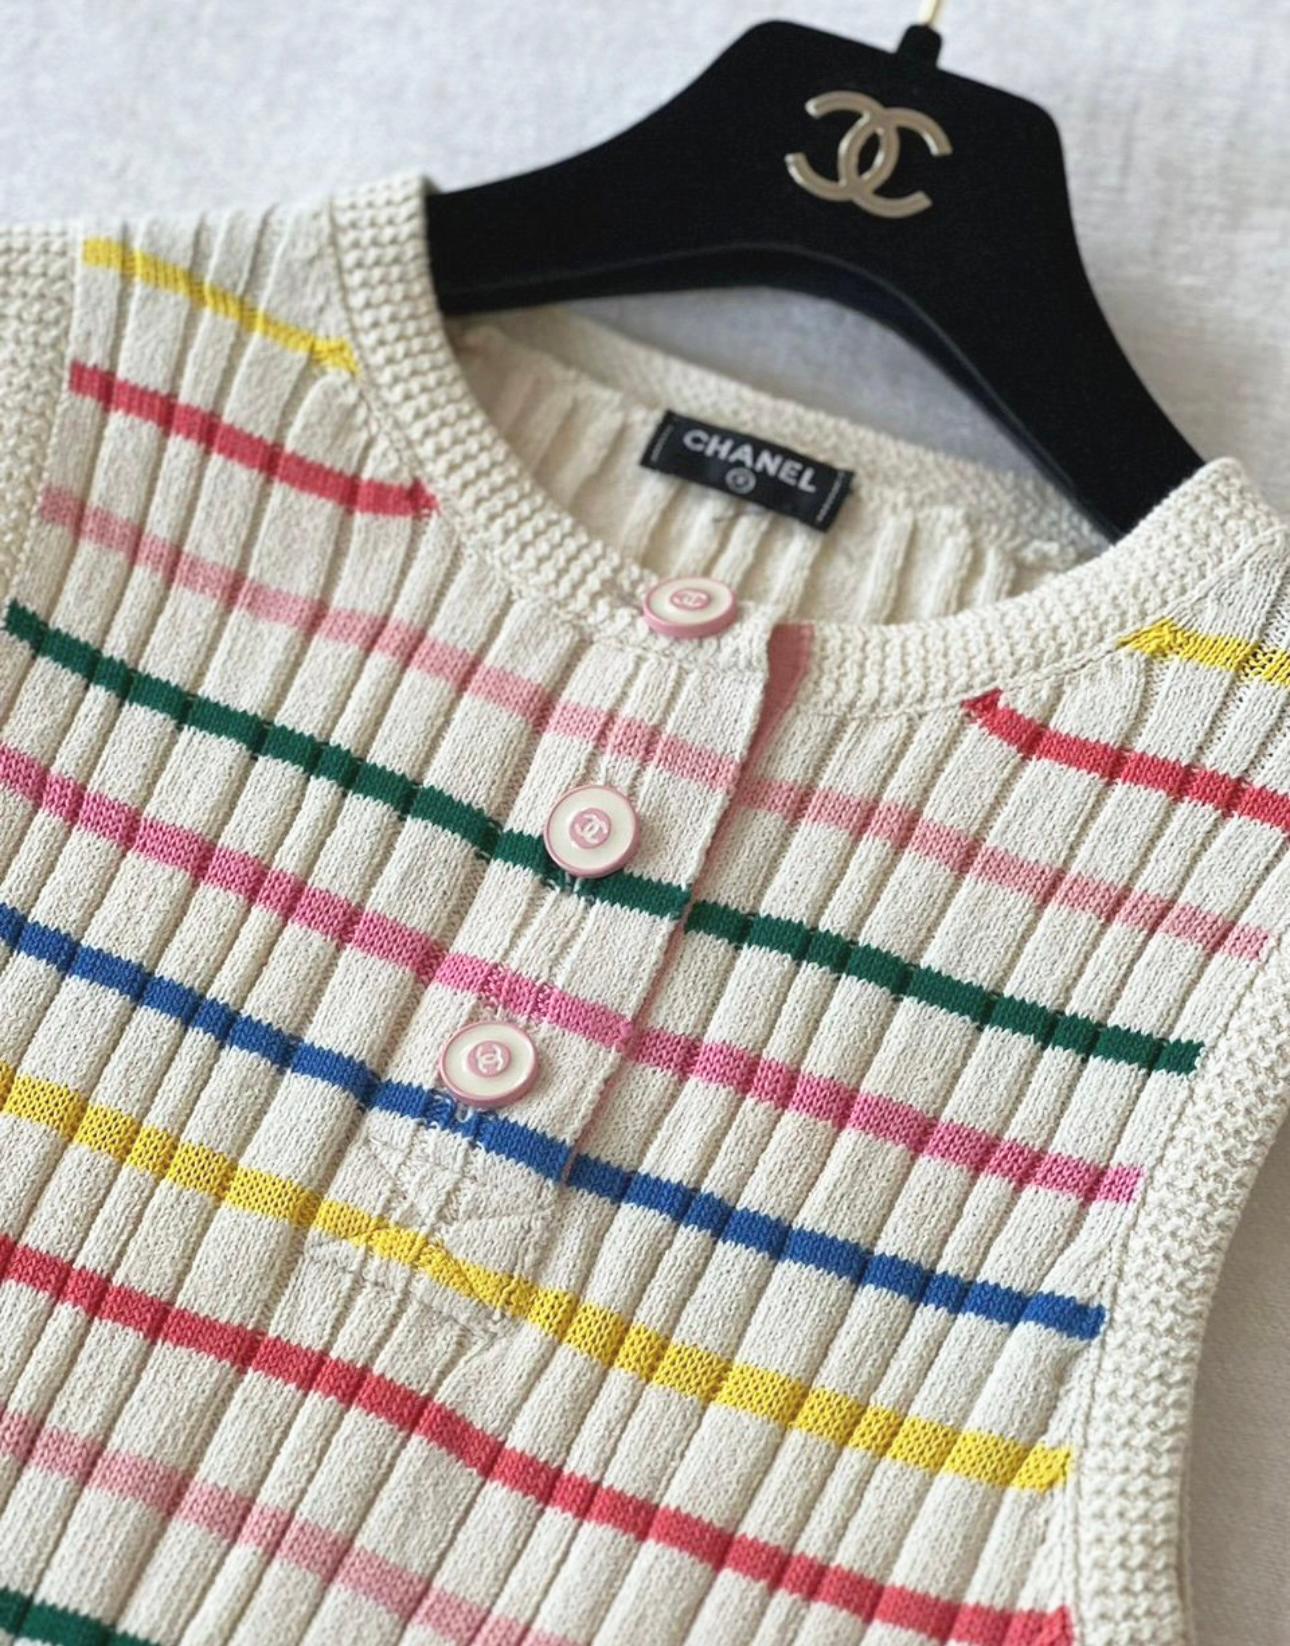 Charming Chanel striped summer dress from 2018 Spring Collection.
- CC logo buttons 
- made of cotton and silk blend
Size mark 36 FR. Condition is pristine.